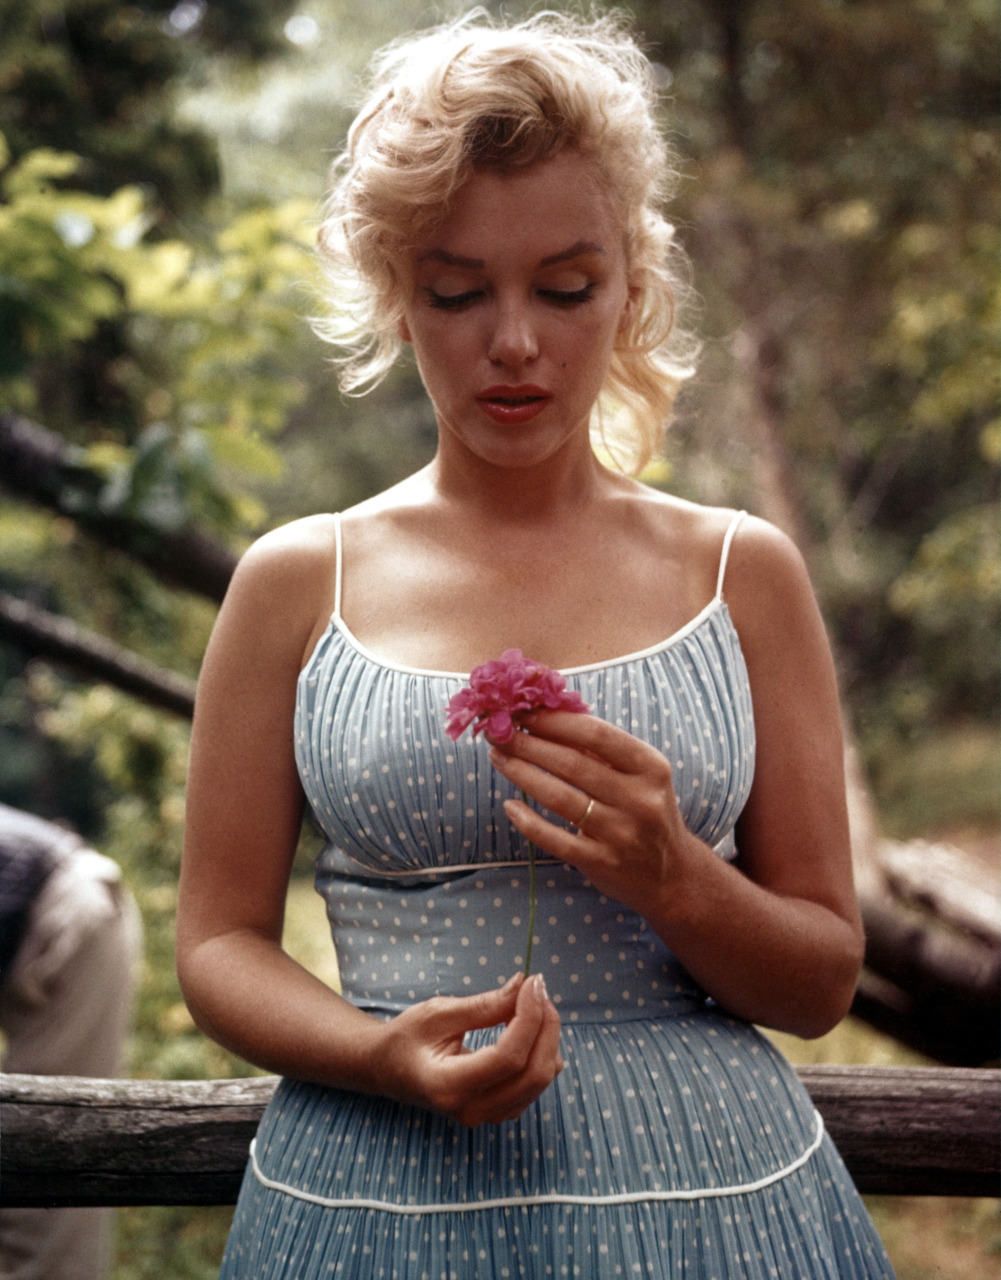 Marilyn Monroe was born on this day in 1926.  She would have been 85 years old today.  